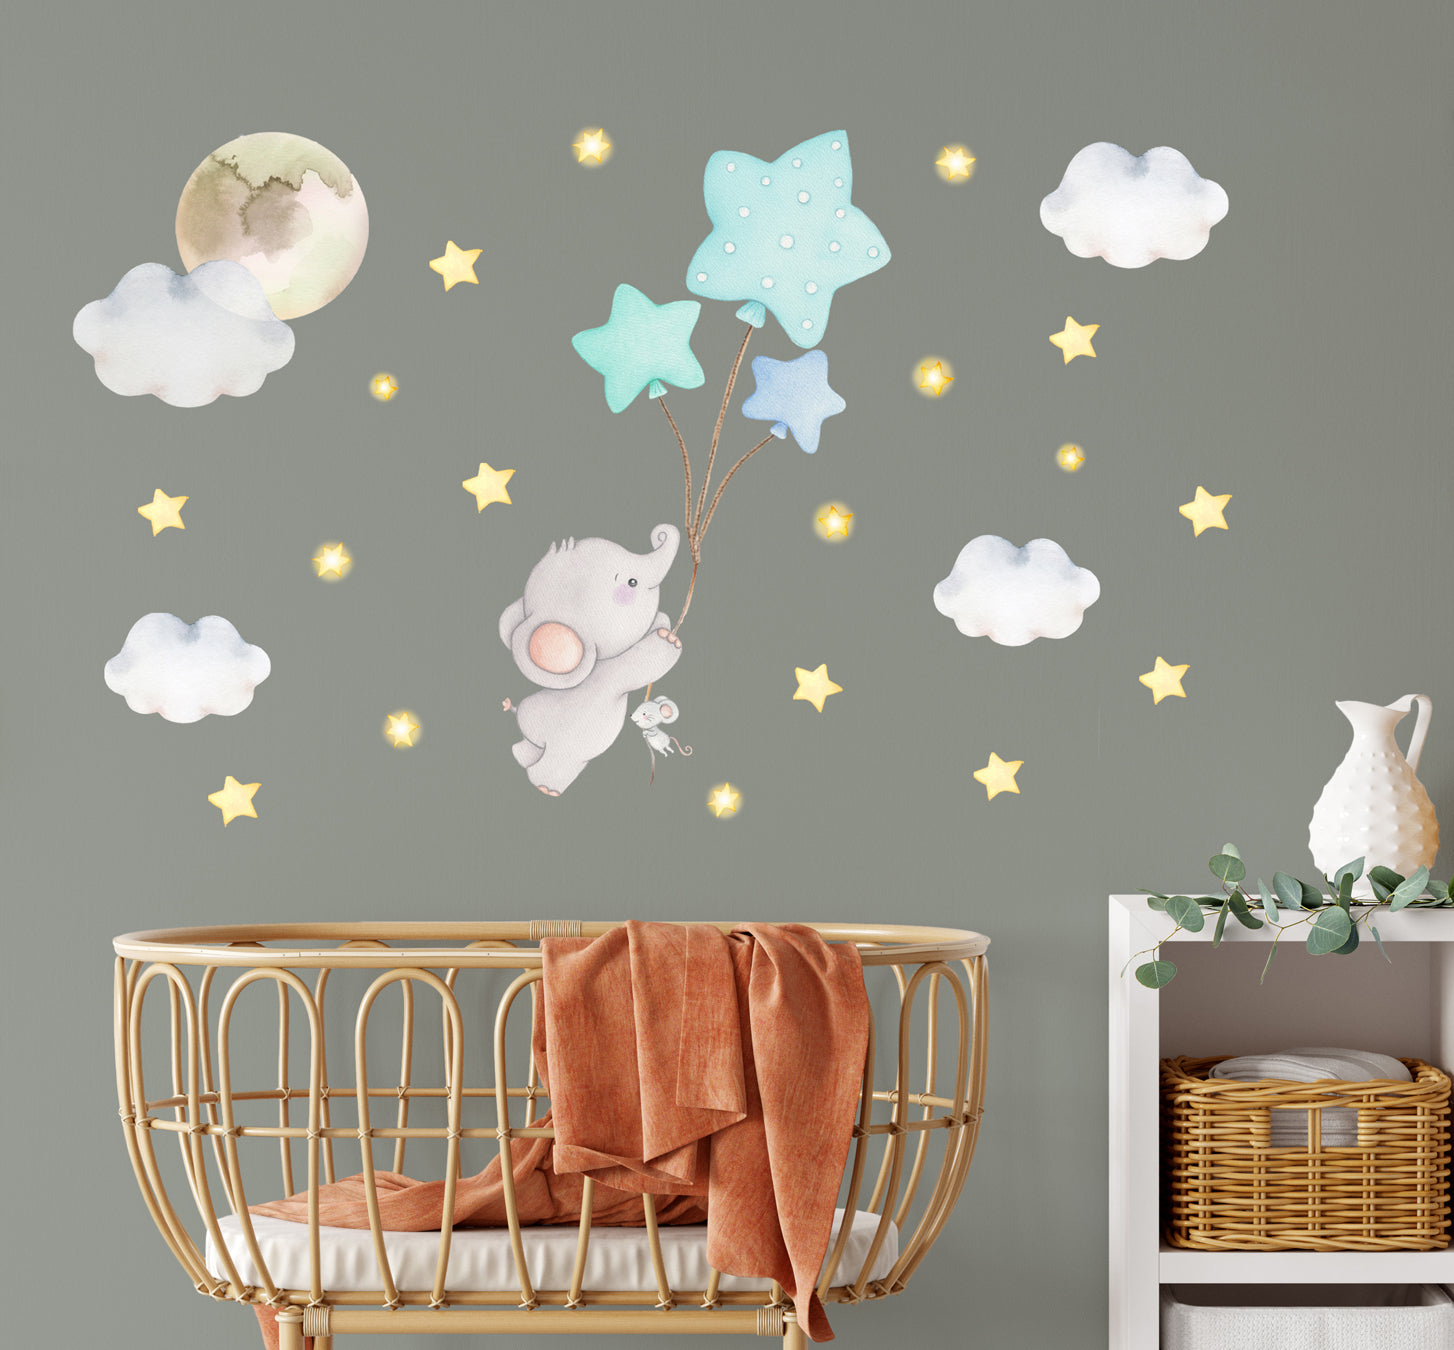 Elephant with balloons. Nursery small wall decals for baby's room. Gold stars and clouds.